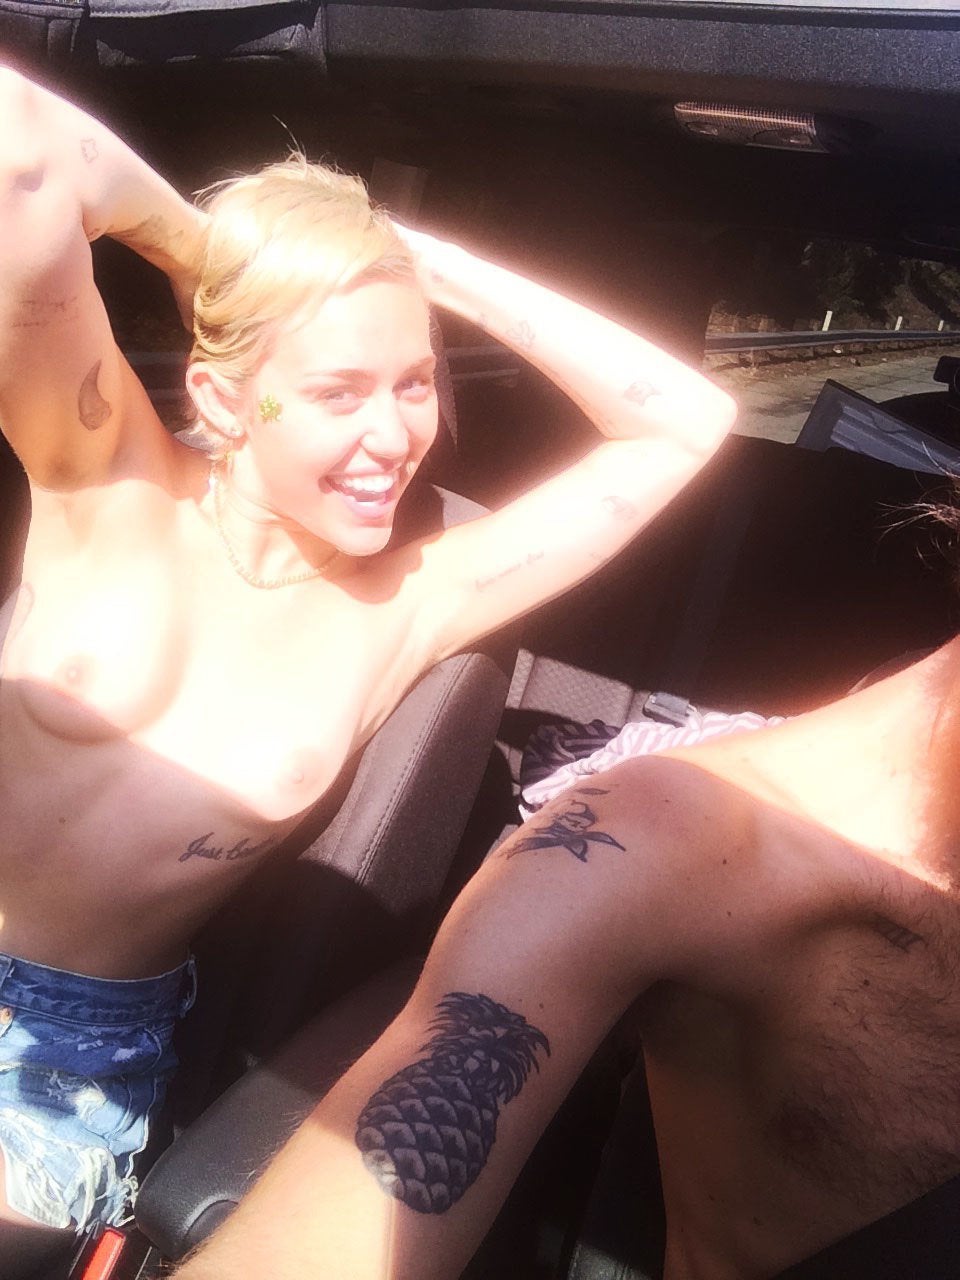 Miley Cyrus Out Cruisin With The Top Down NSFW